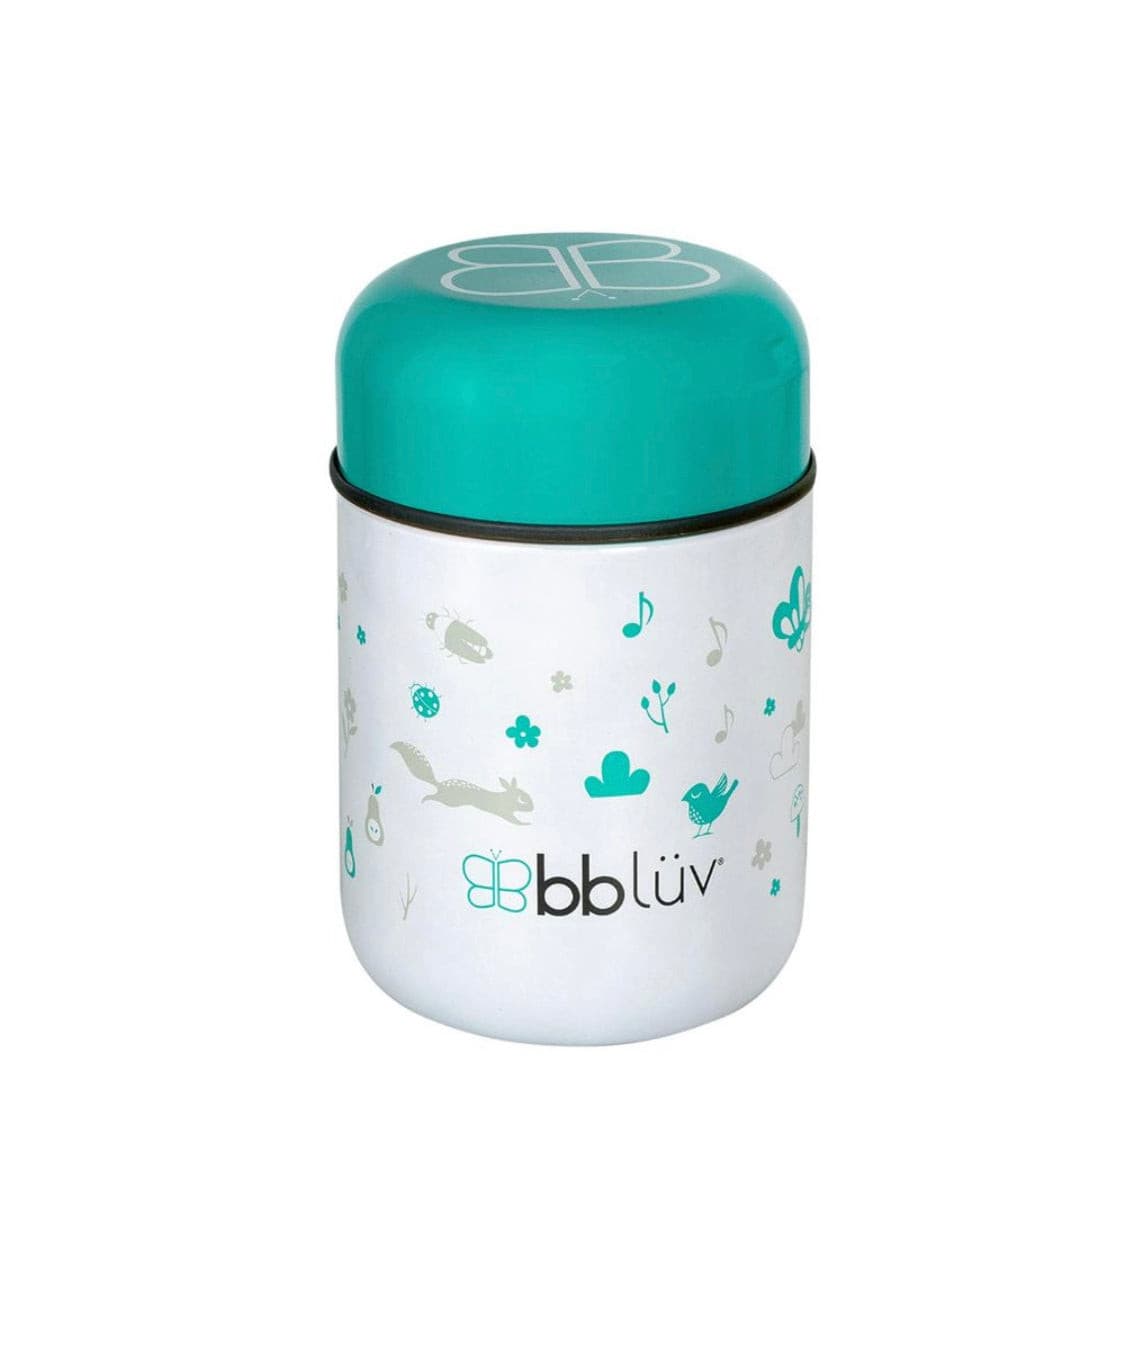 BBLUV Foöd - Thermal food container with spoon.